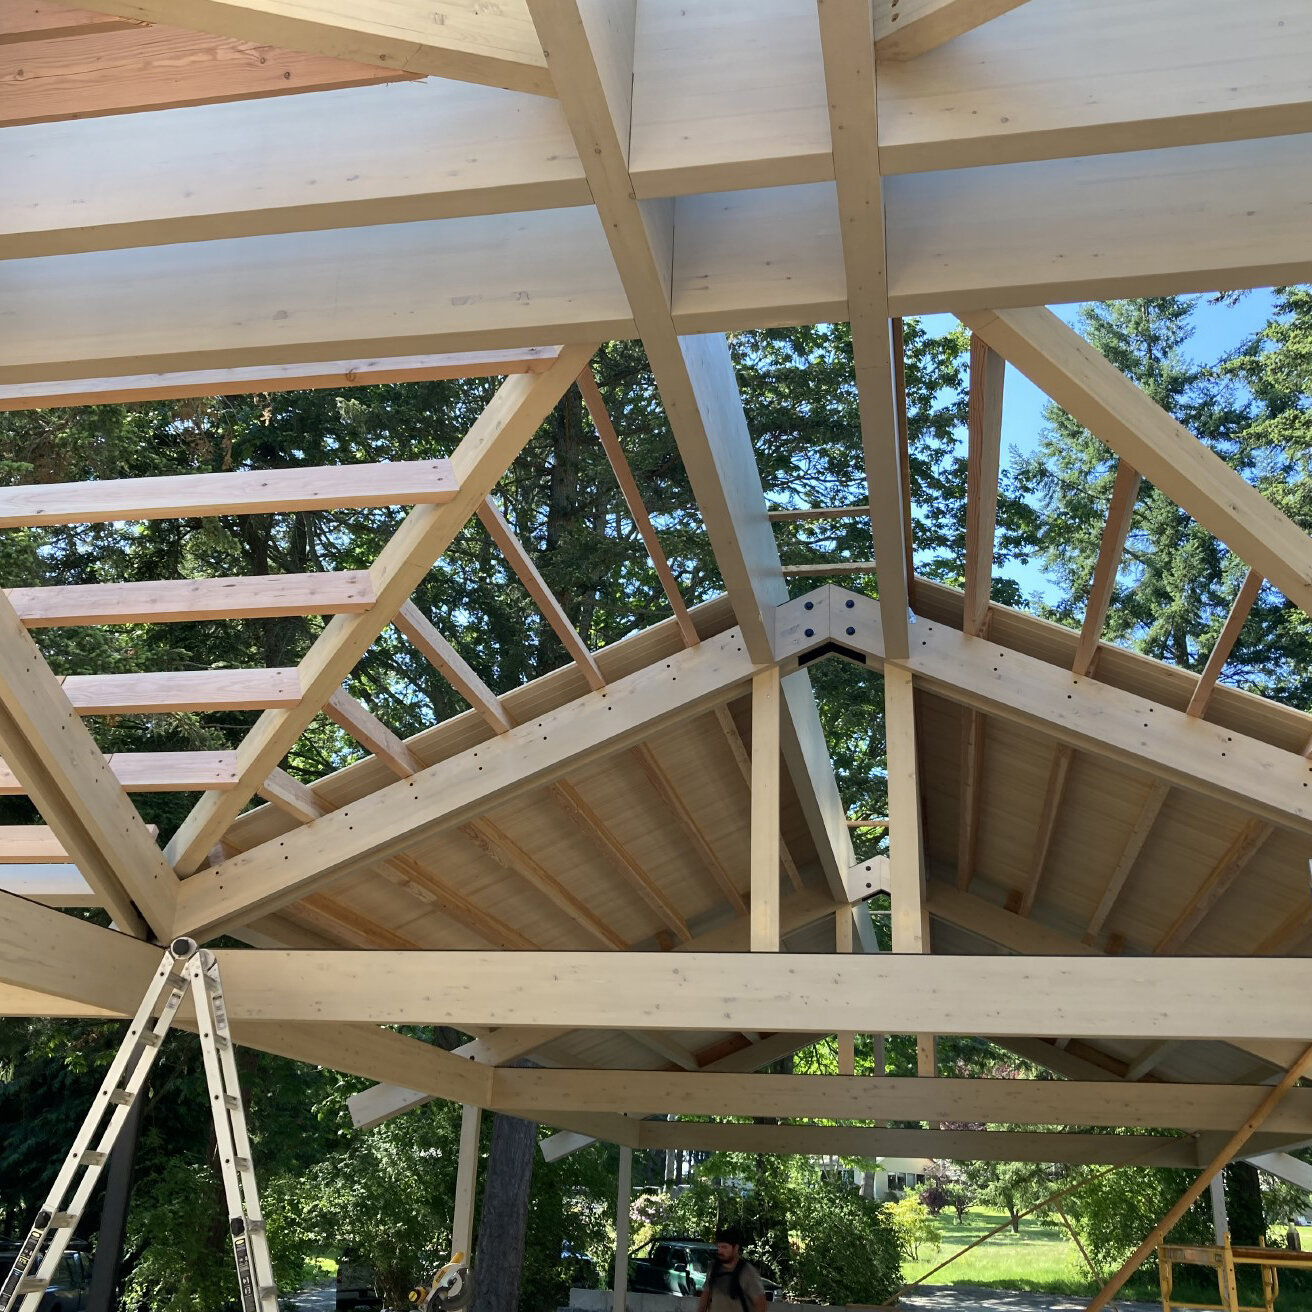 Timber frame going up on our Whidbey Island Retreat in Puget Sound...so satisfying to see this woodcraft expertly assembled by the build team.

#timberframe #alaskanyellowcedar #architecture #moderncabin #exposedframing #modern #design #seattle #whid